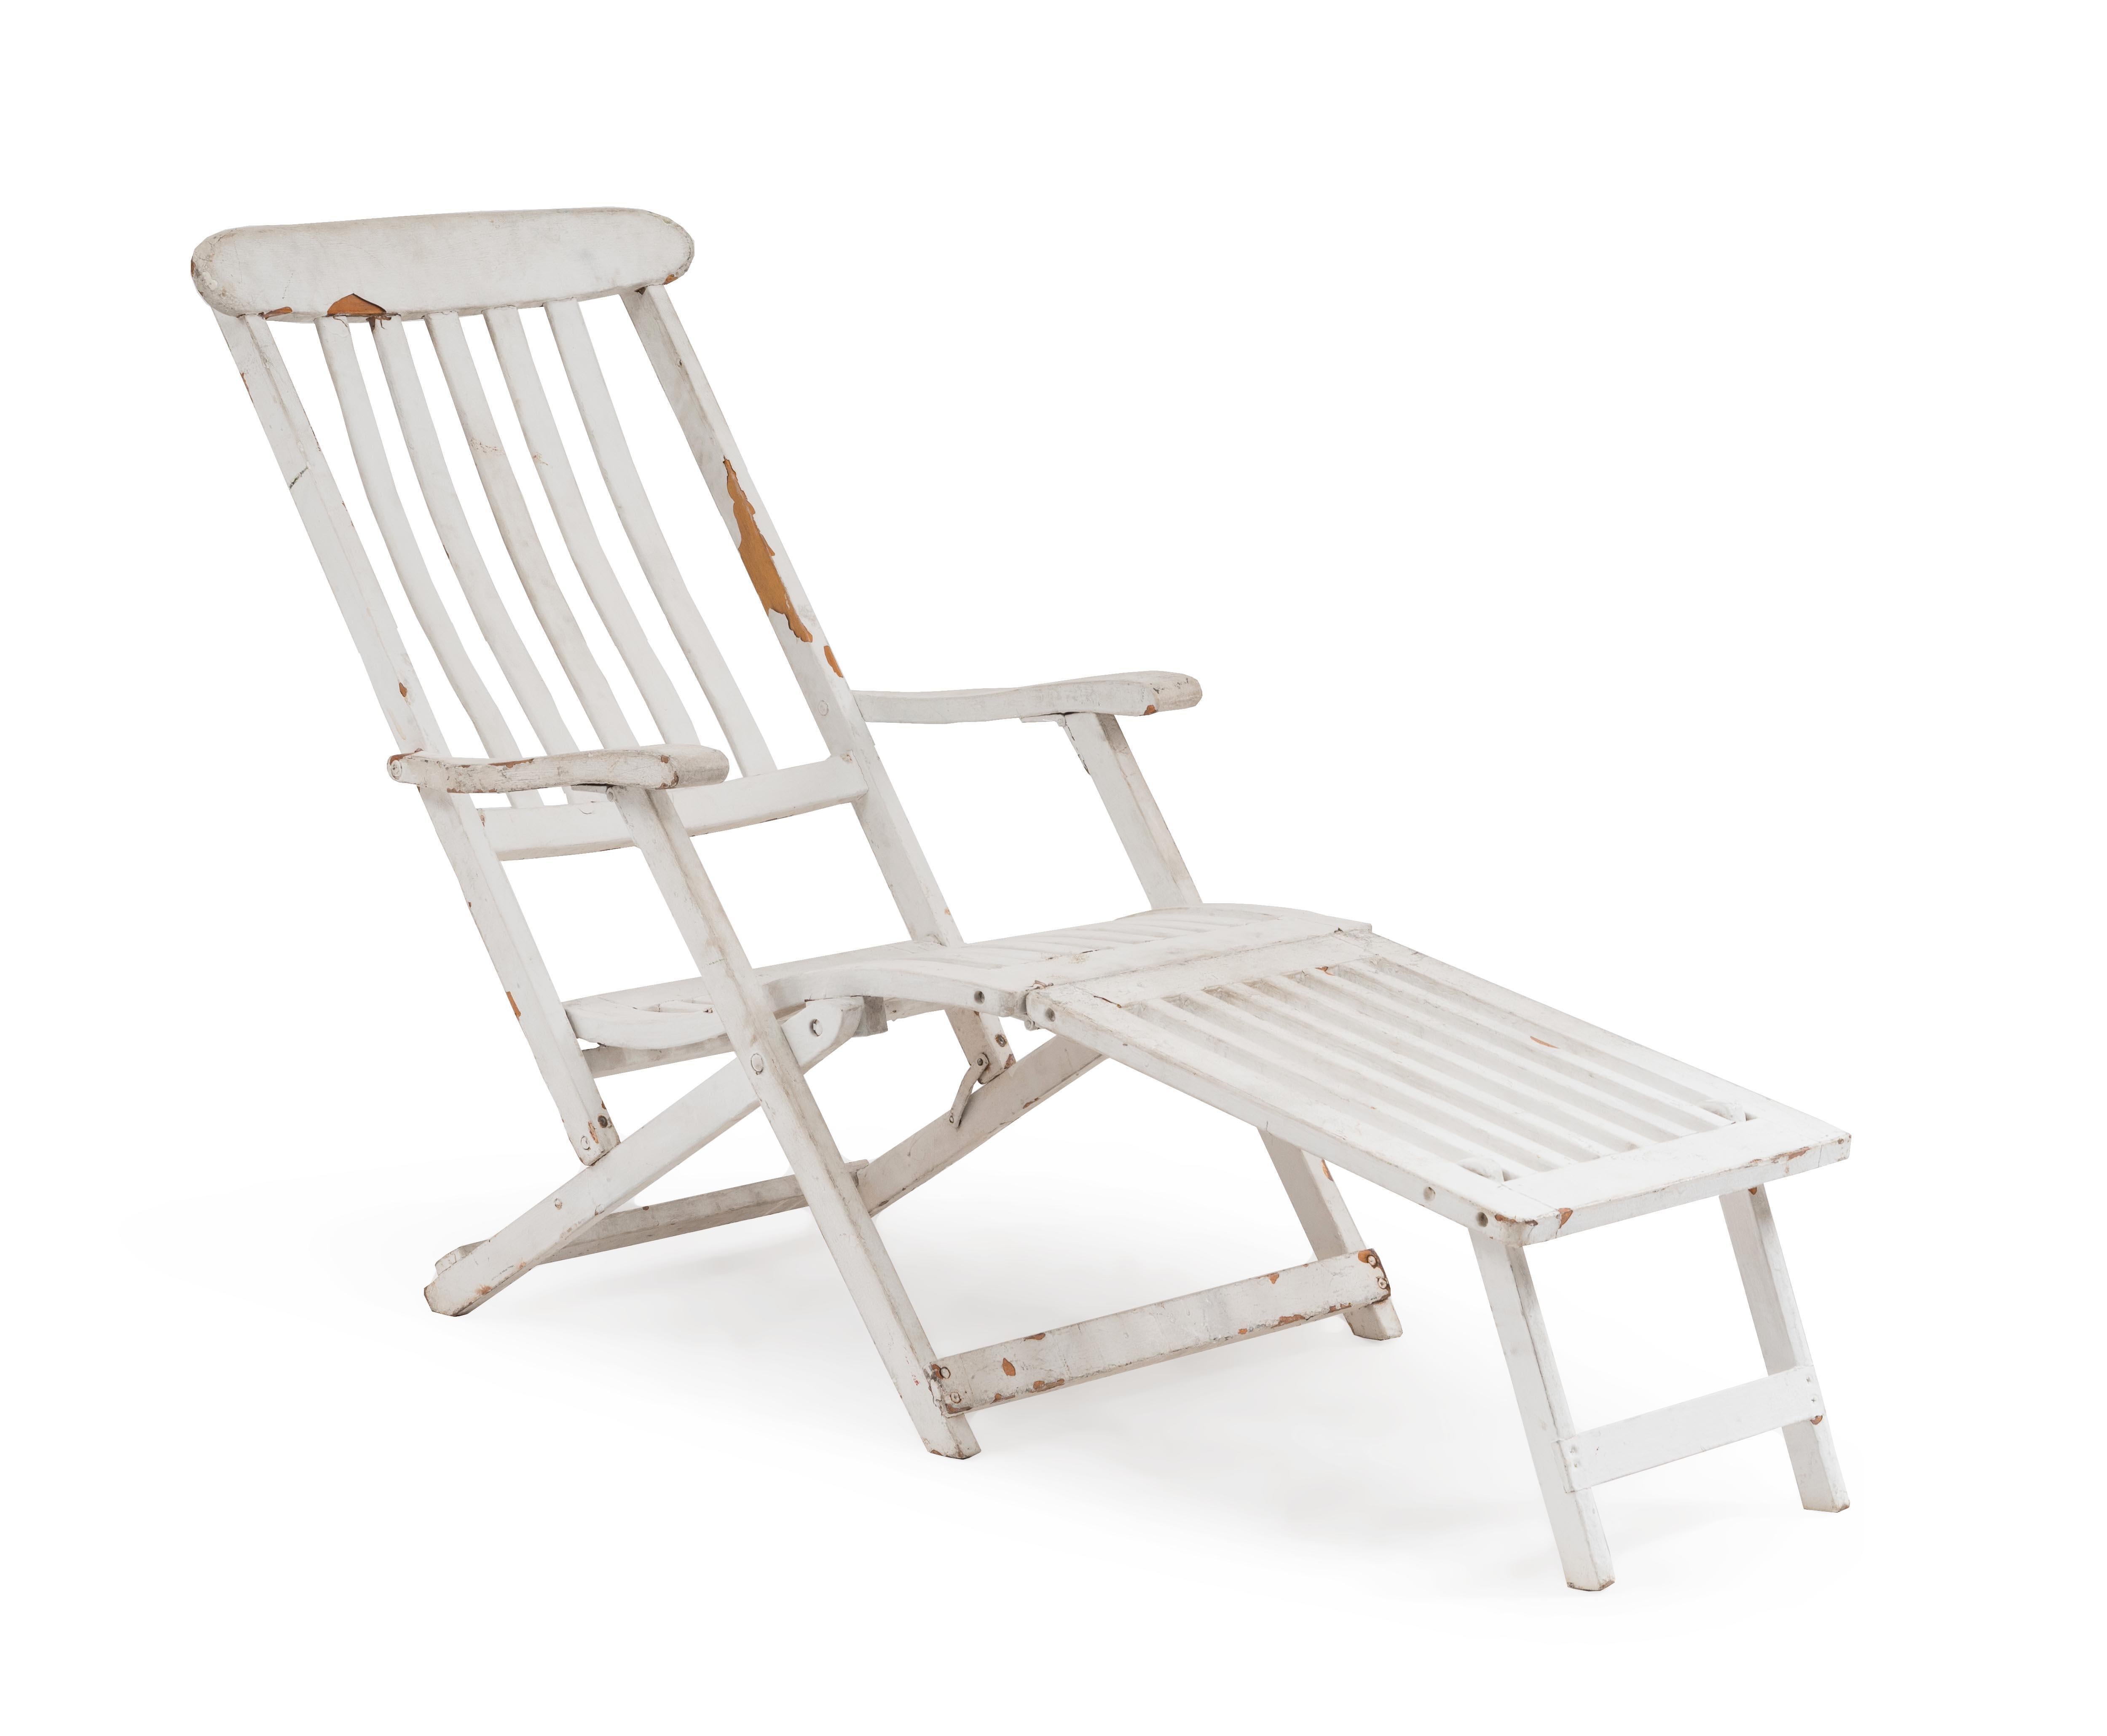 2 outdoor (20th century) white painted folding deck chairs with slat design (Priced each).